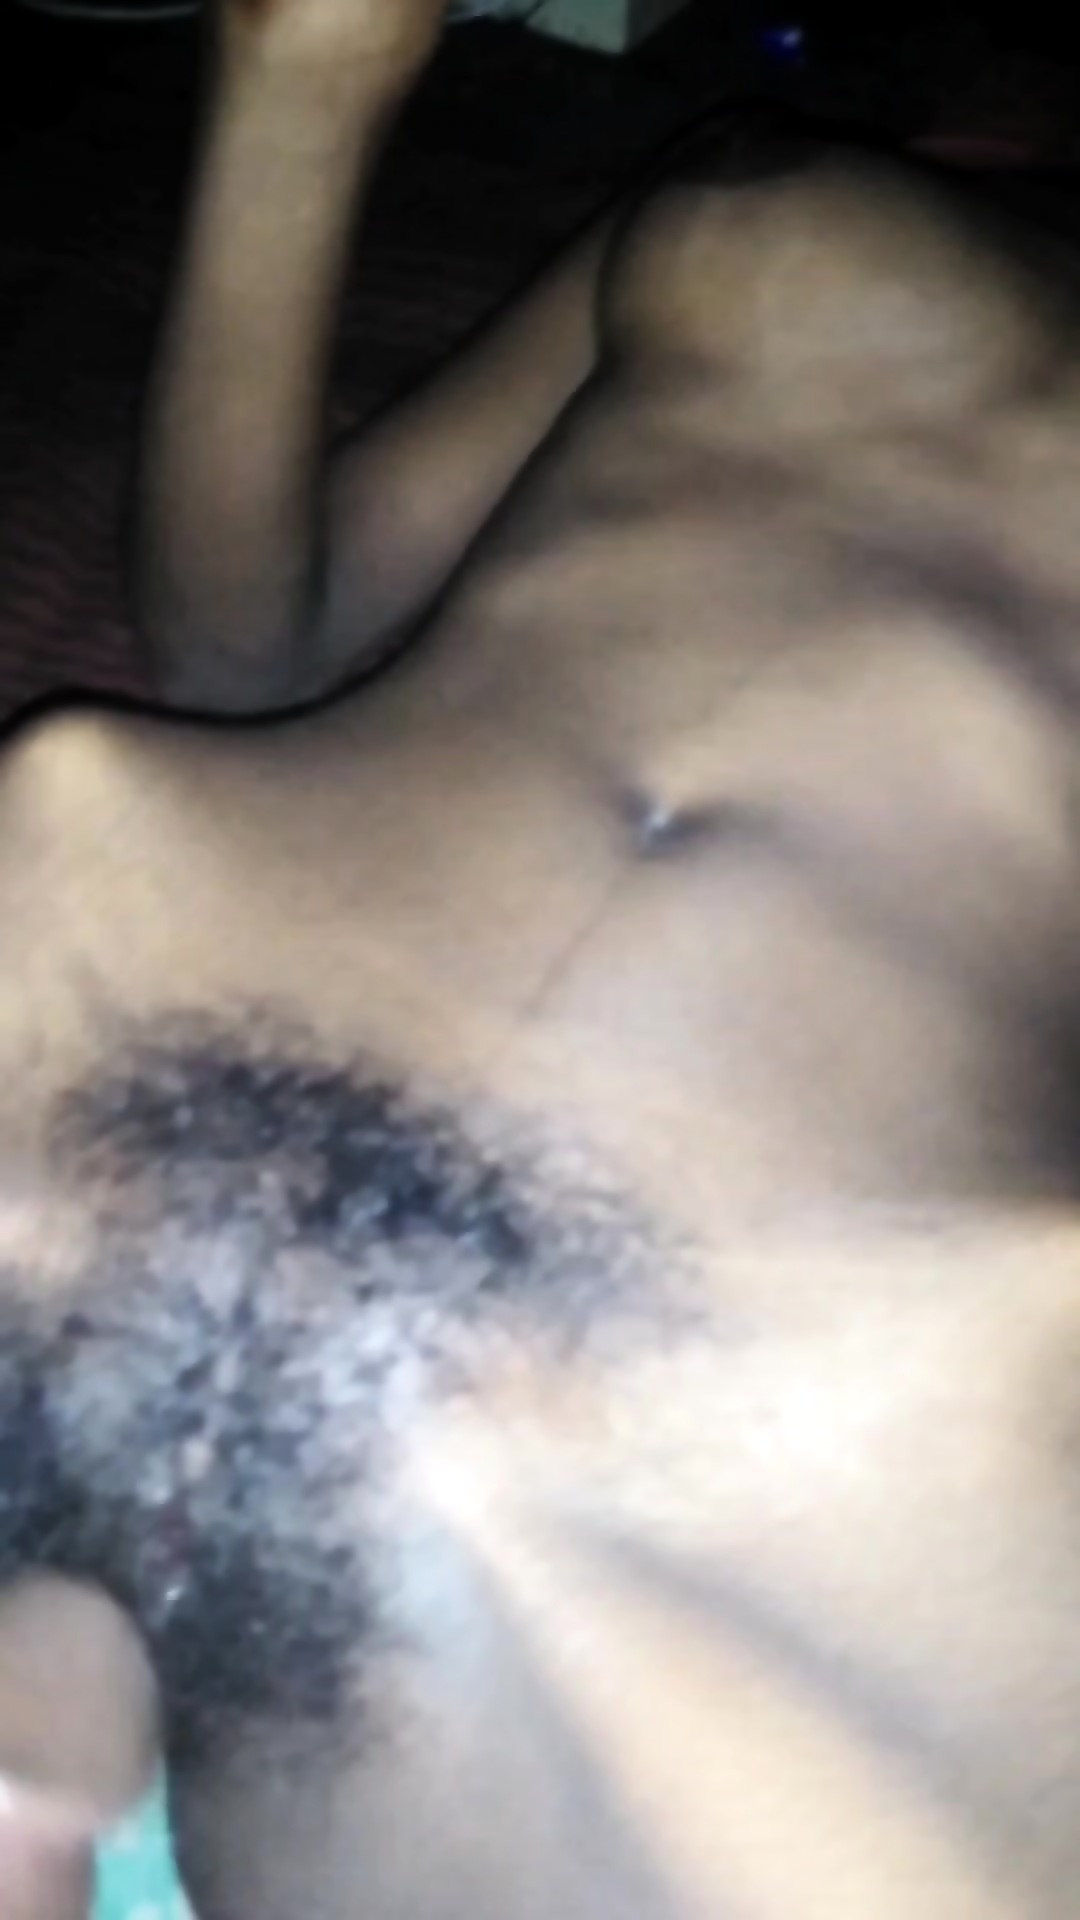 Indian Desi Tamil My Wife Hot Black Hairy Pussy Hard Fucking Cute Boob picture